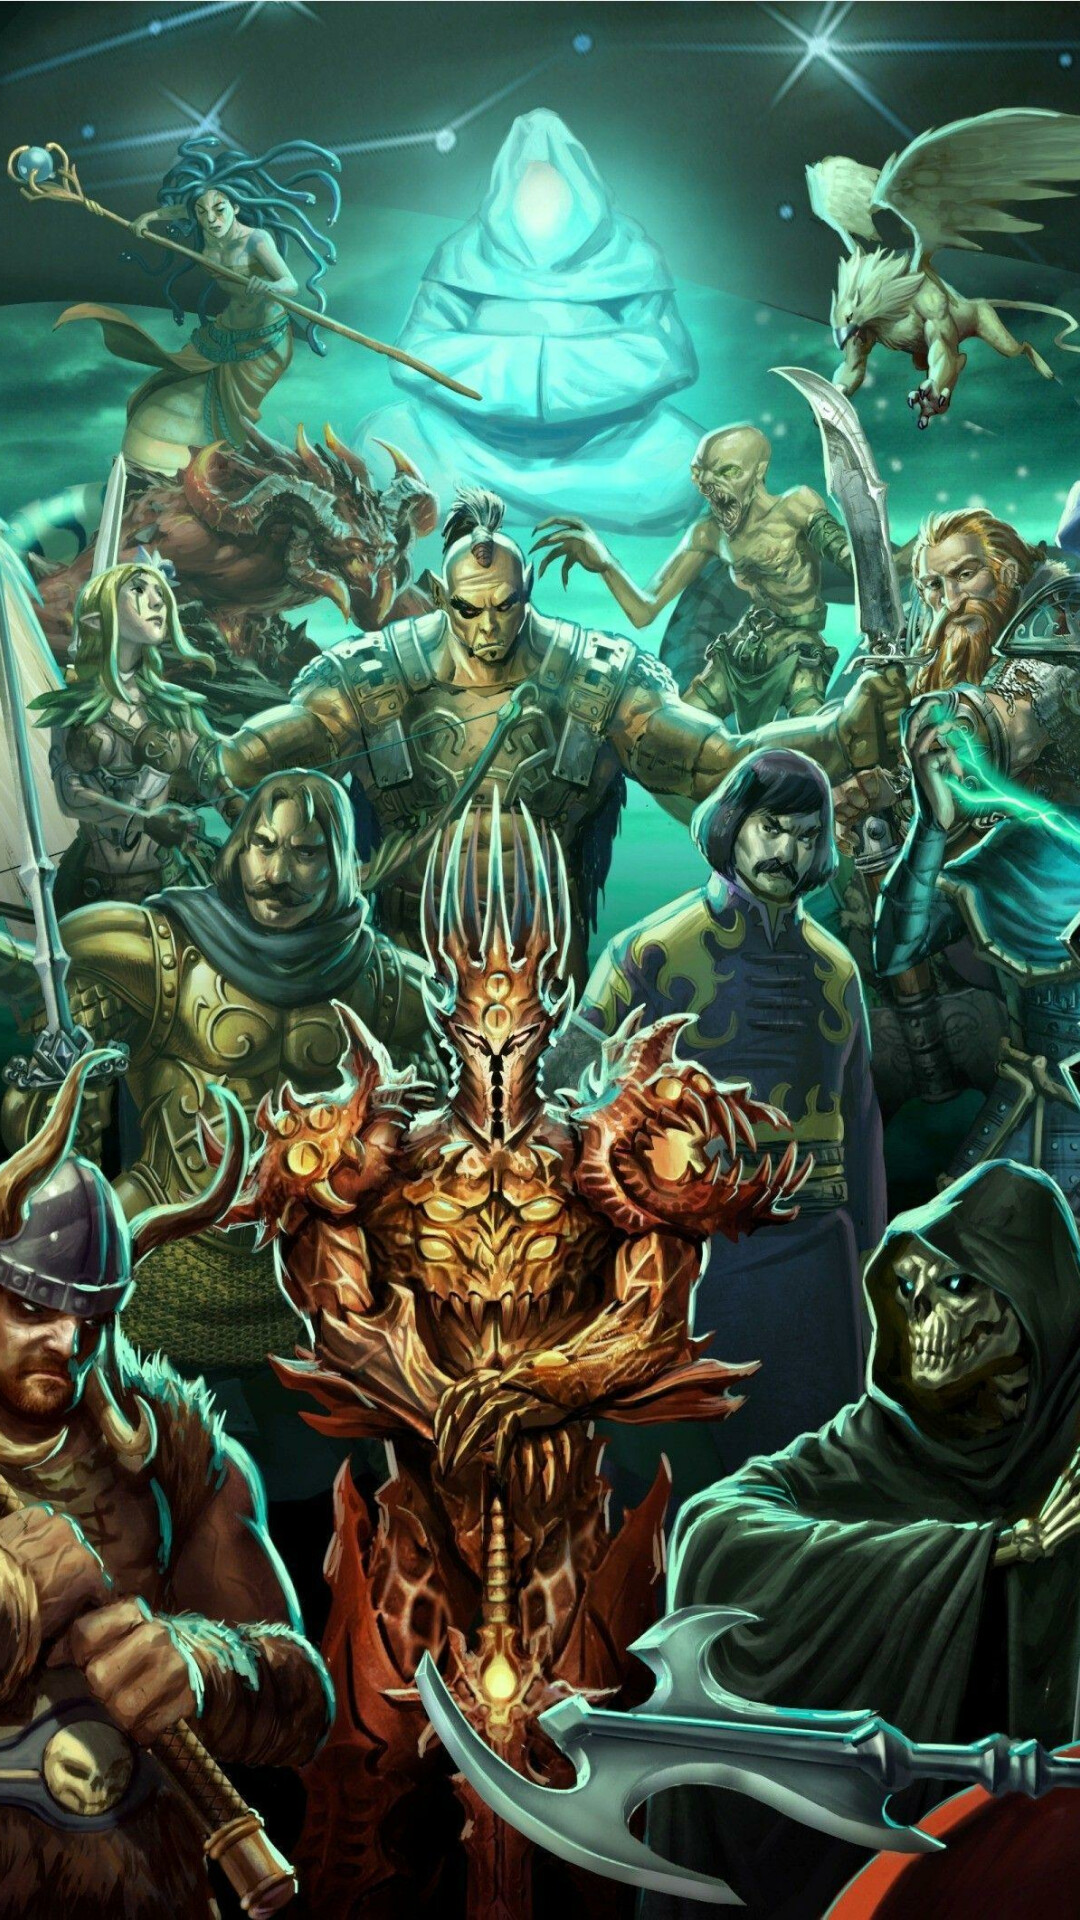 Heroes of Might and Magic: A series of turn-based strategy computer games created by New World Computing. 1080x1920 Full HD Wallpaper.